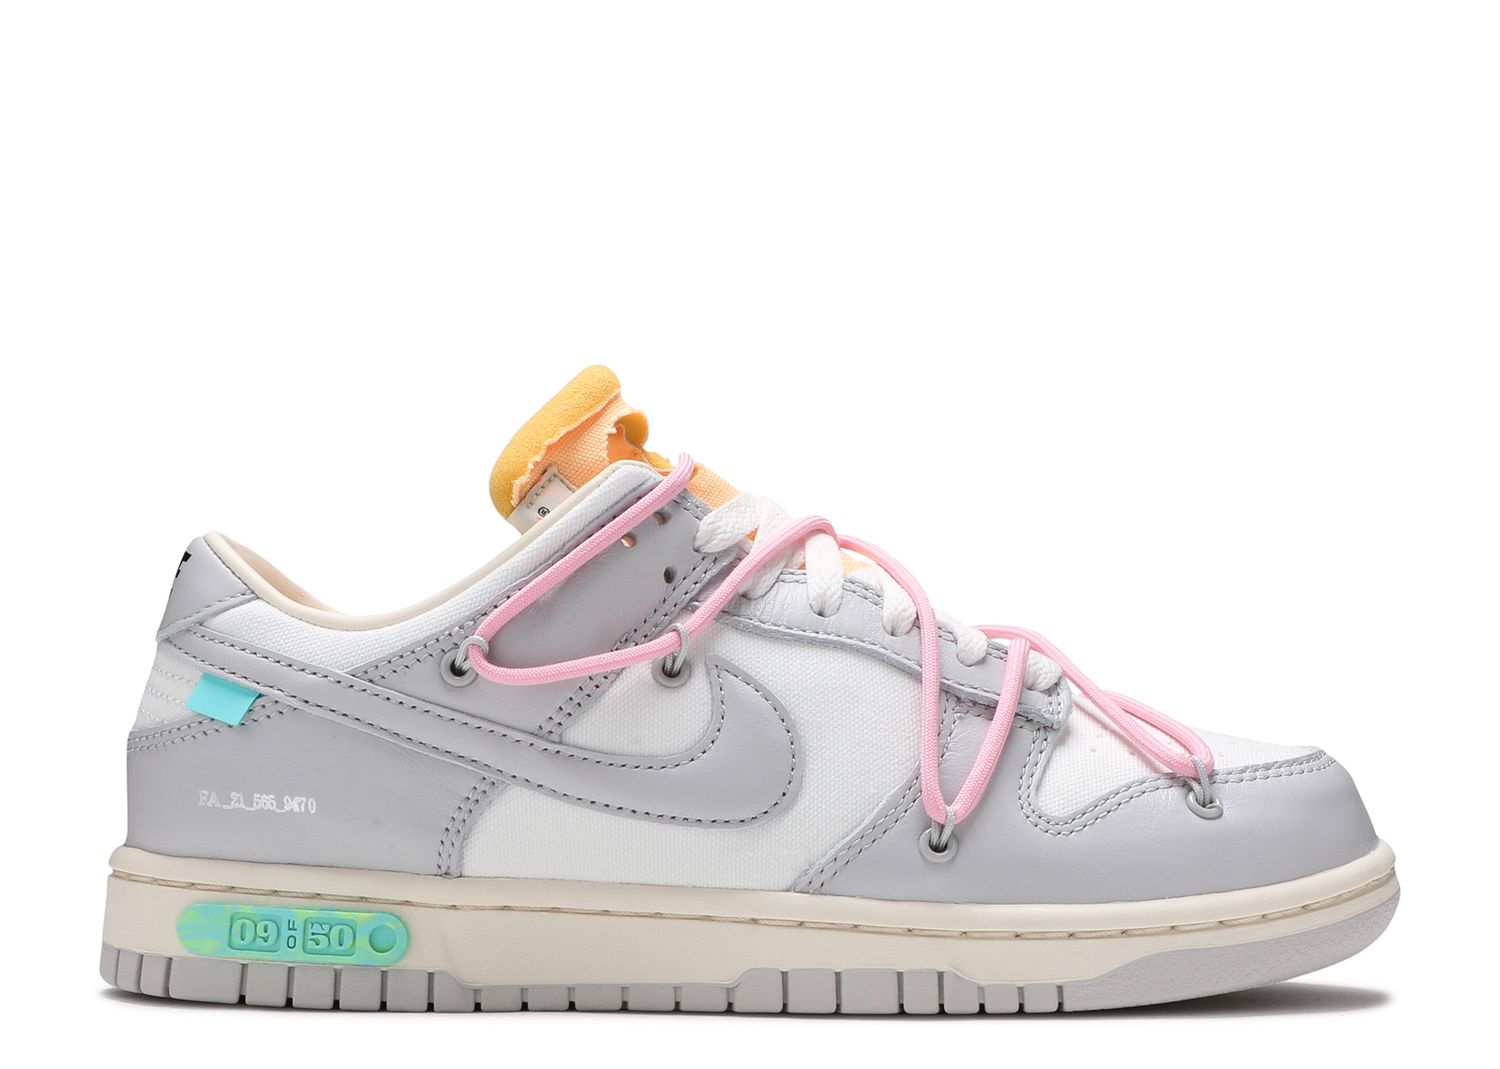 Off White X Dunk Low 'Lot 09 Of 50' - Nike - DM1602 109 - sail/neutral ...